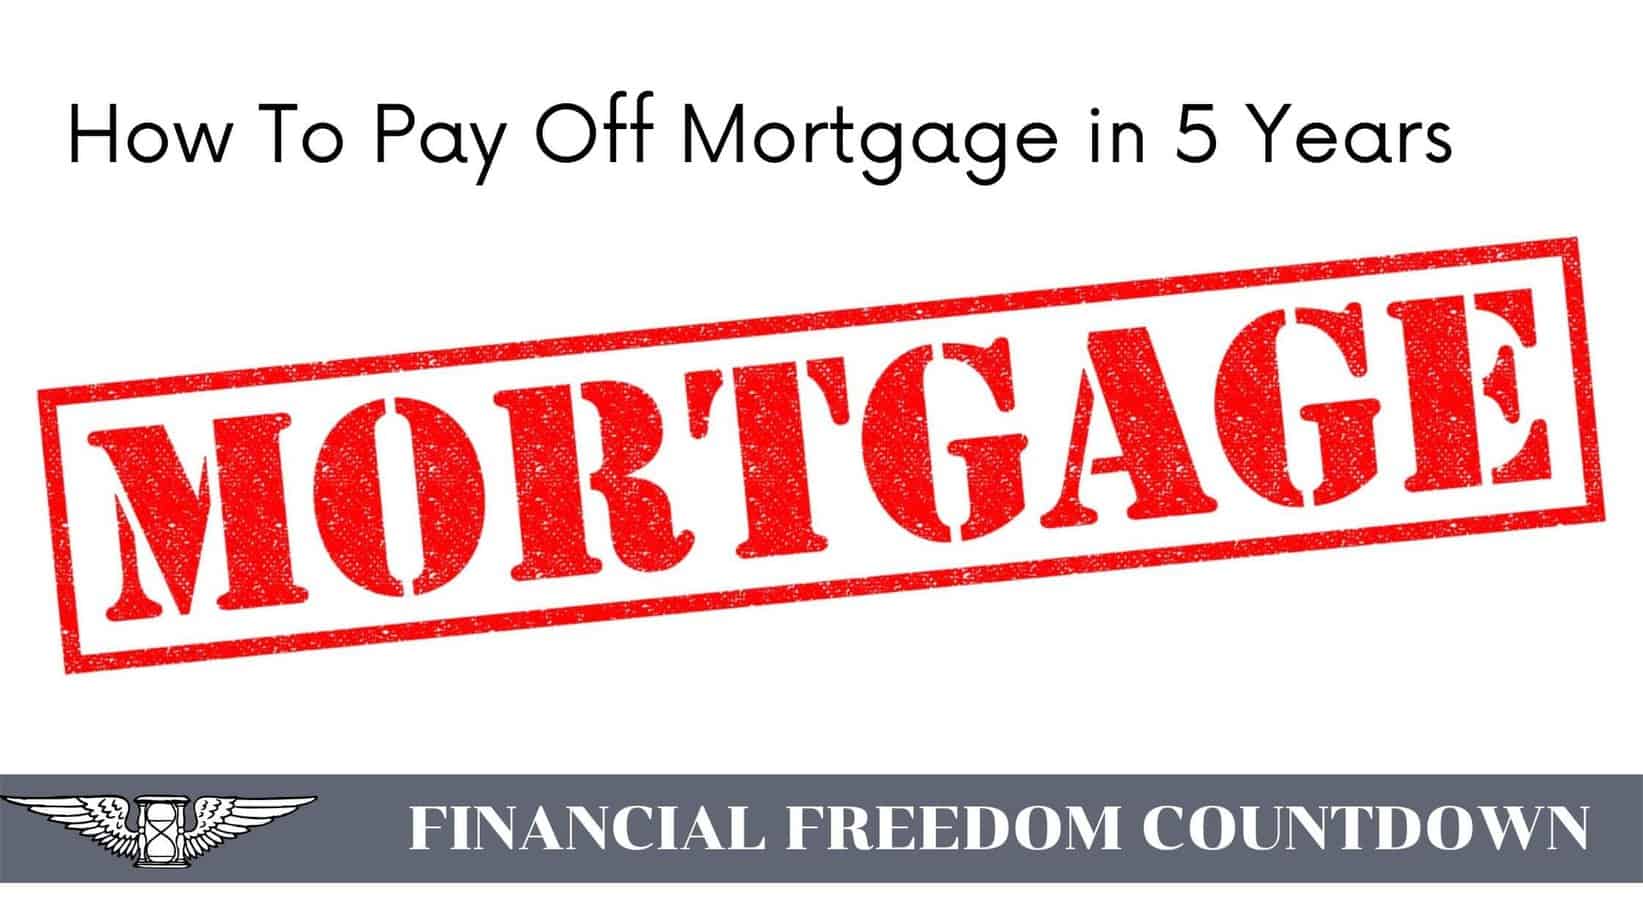 How To Pay Off Mortgage in 5 Years